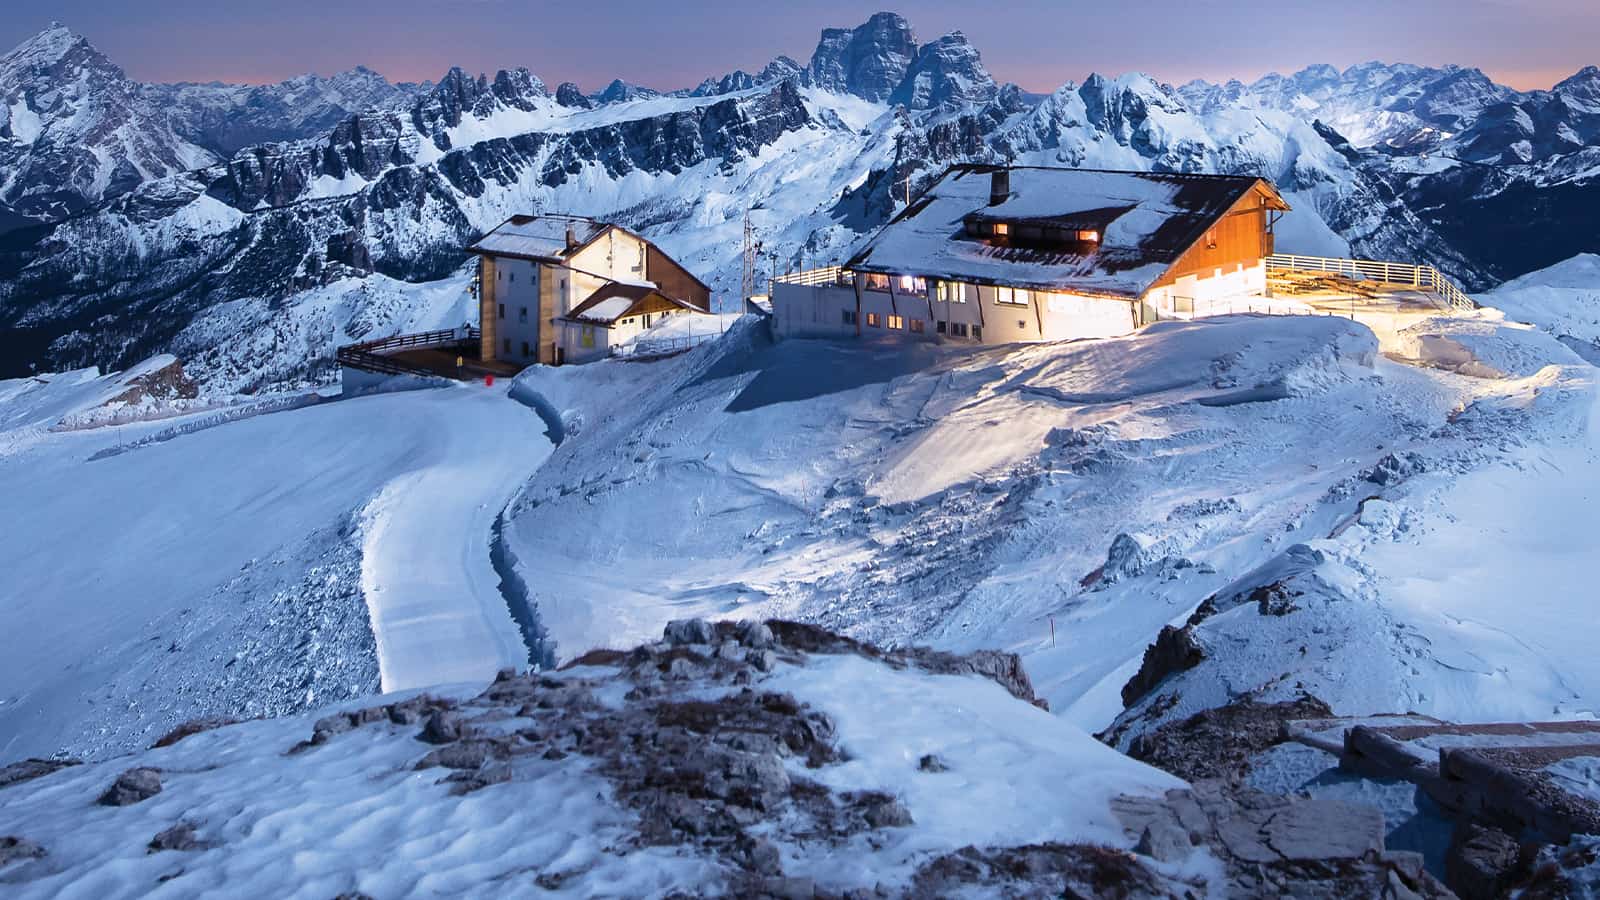 Cabins on a high mountain peak with bright lights turned on.